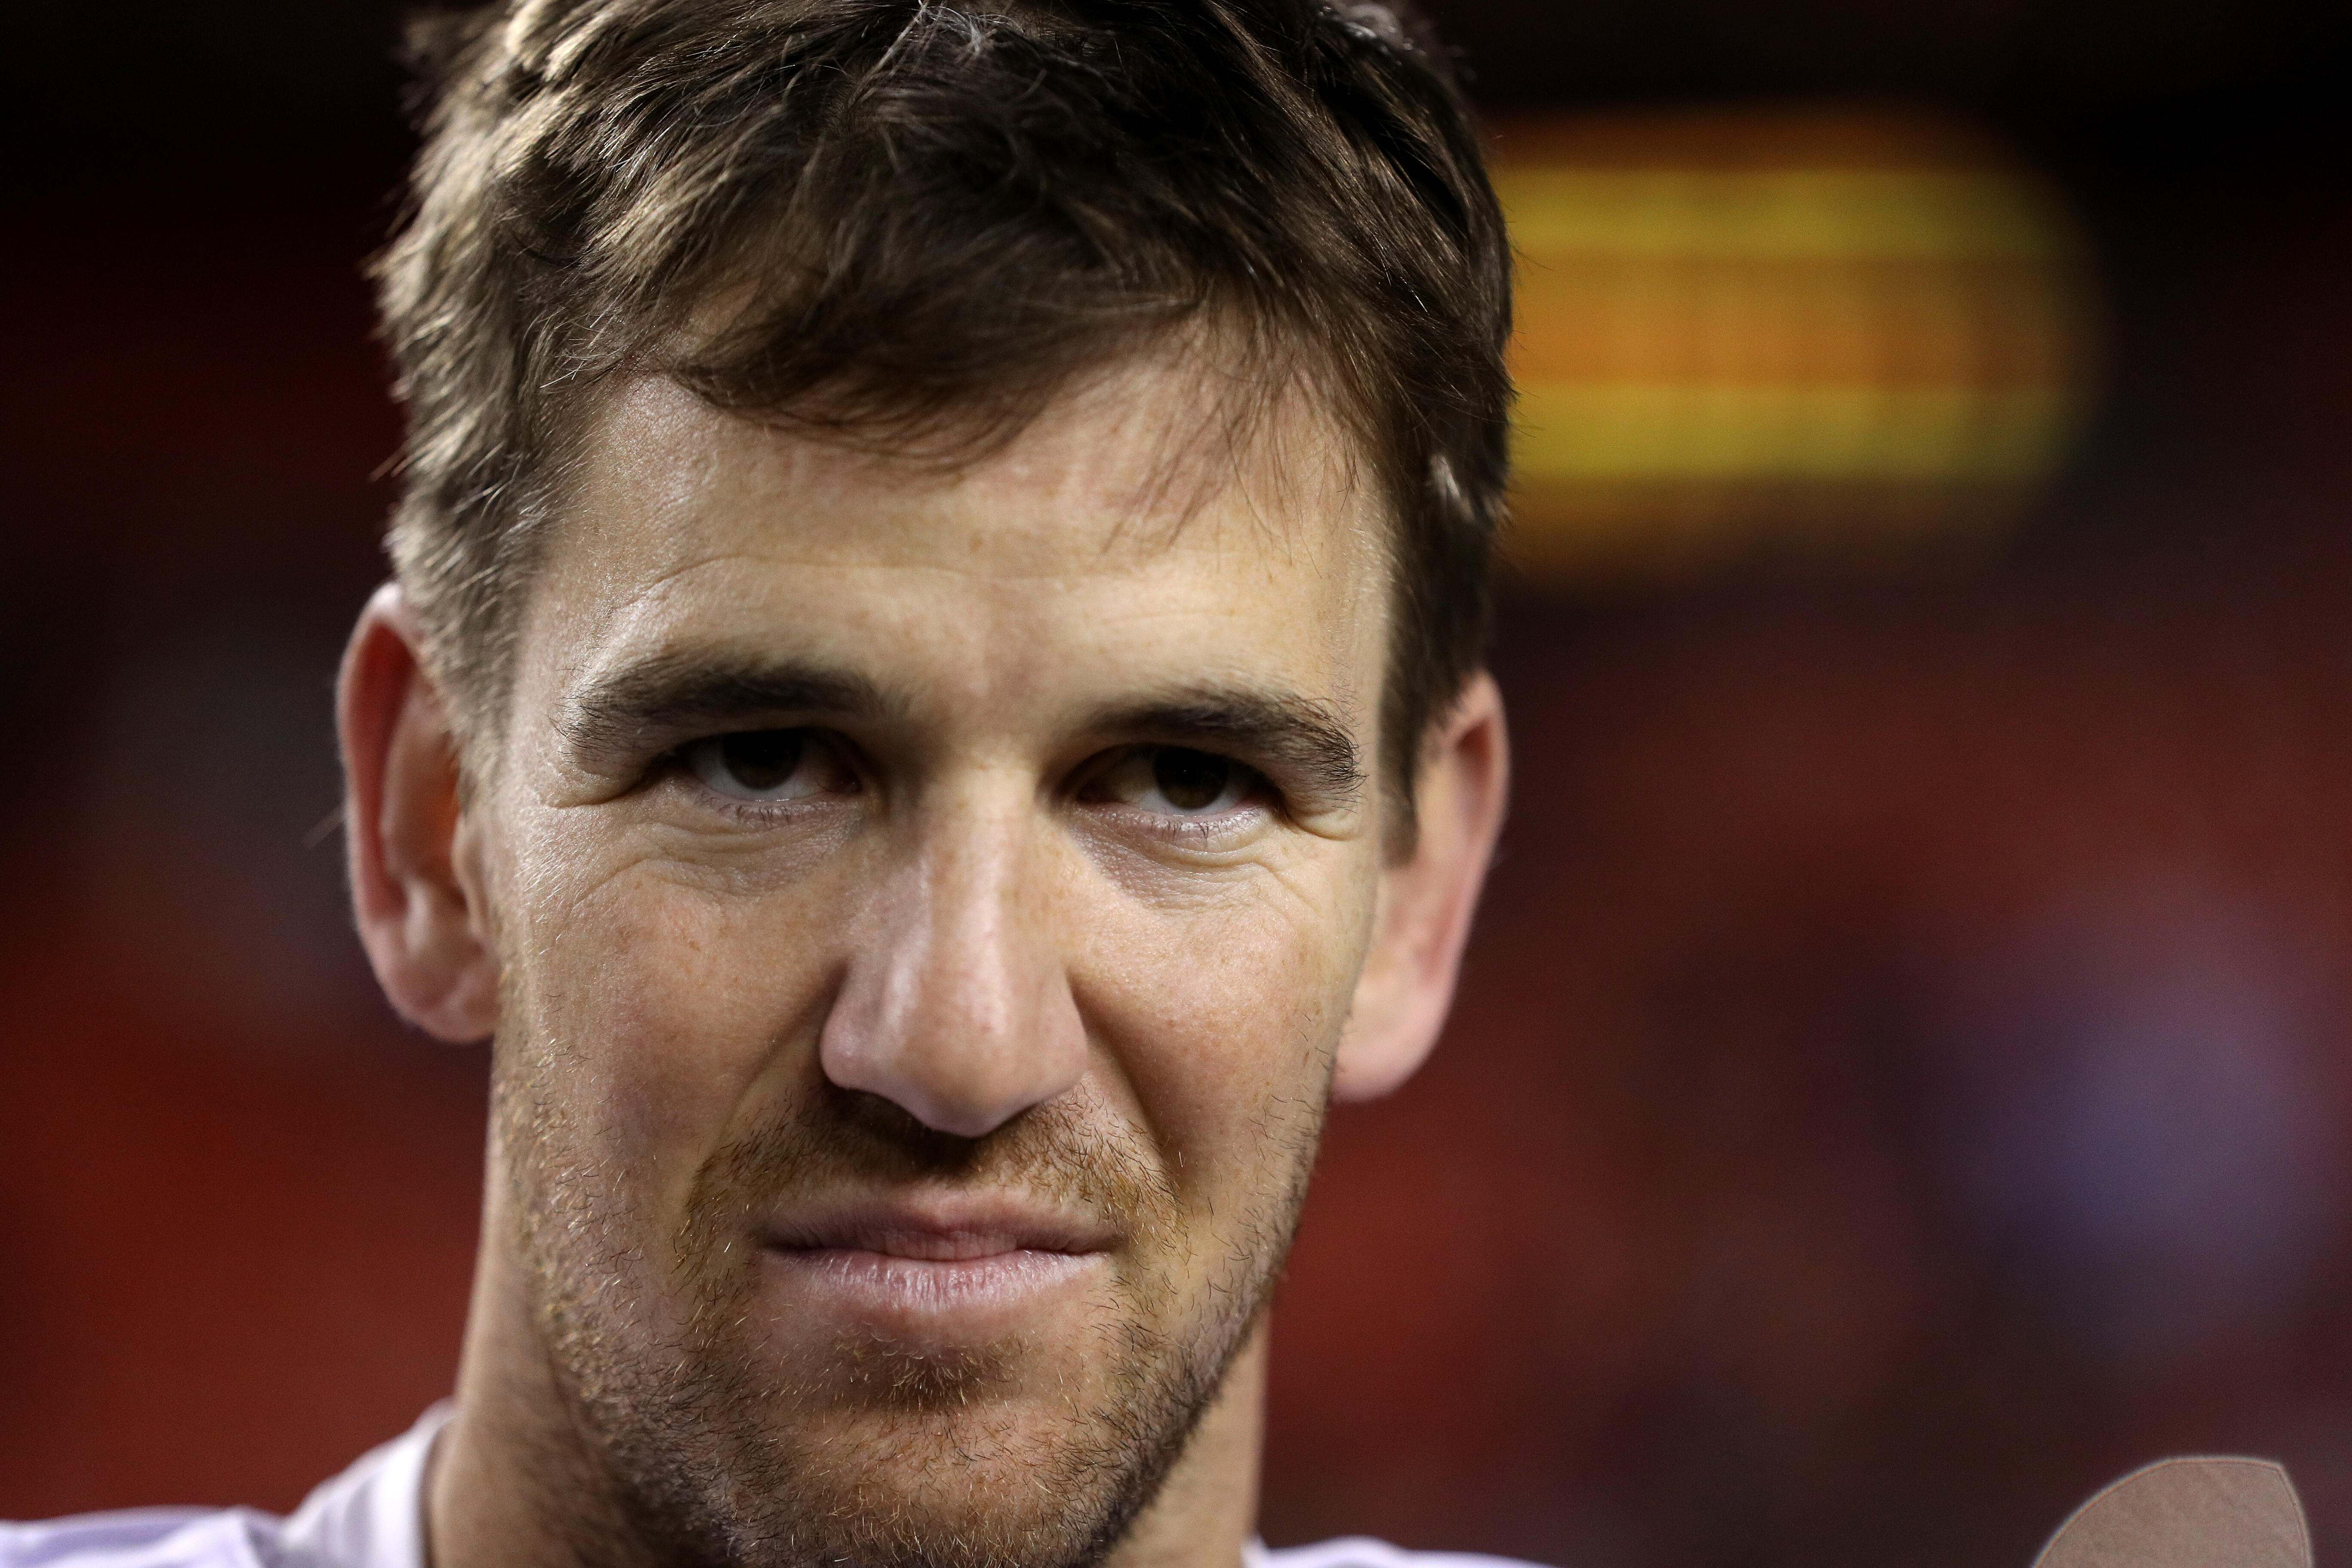 LANDOVER, MD - JANUARY 01: Quarterback Eli Manning #10 of the New York Giants looks on after the New York Giants defeated the Washington Redskins 19-10 at FedExField on January 1, 2017 in Landover, Maryland. (Photo by Patrick Smith/Getty Images)